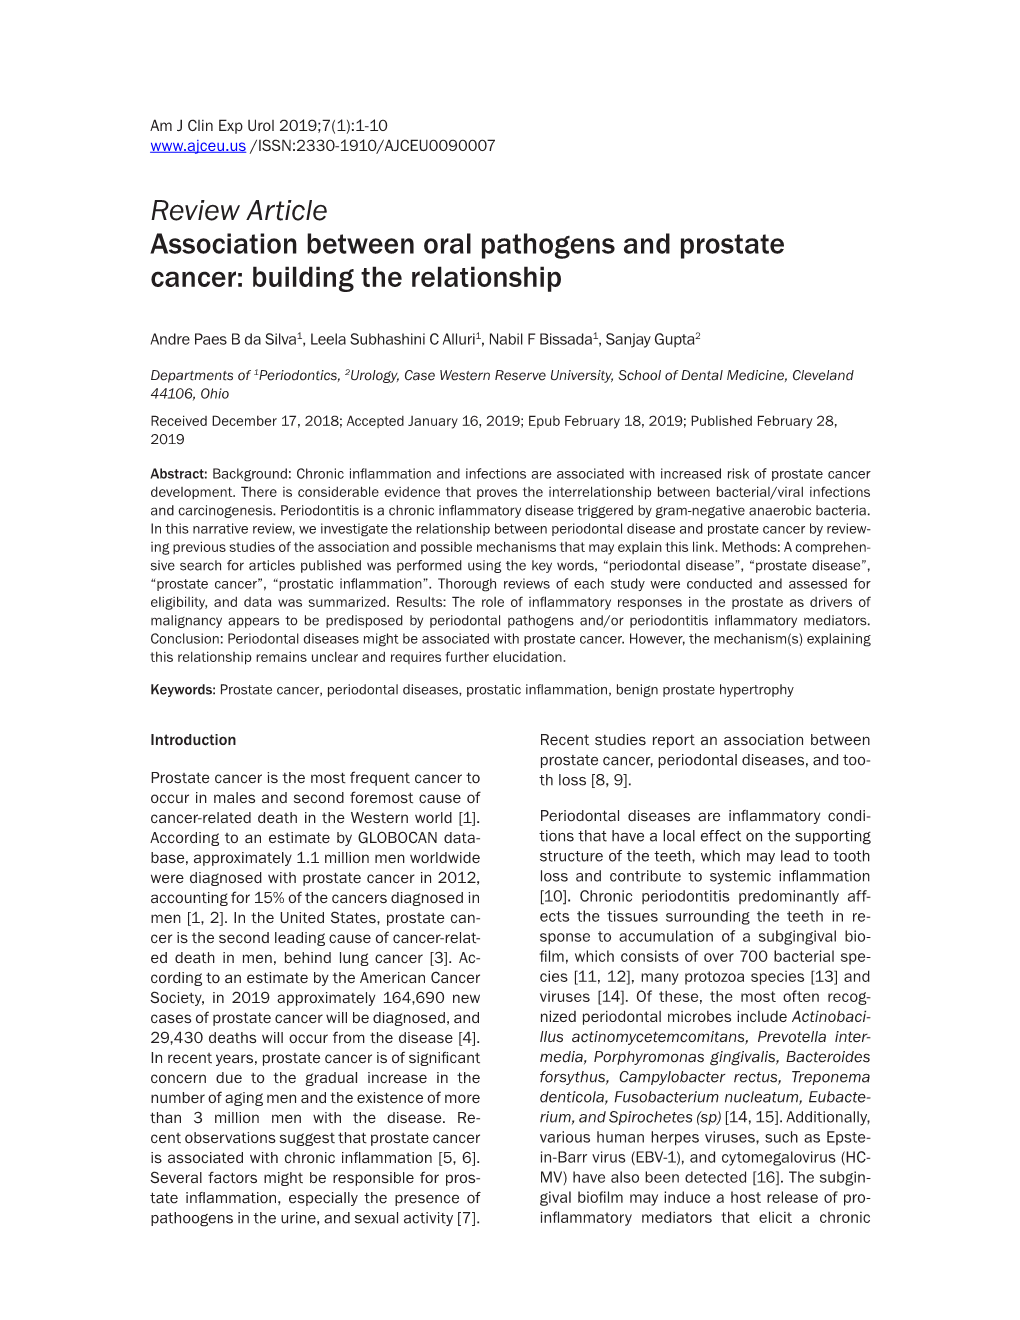 Review Article Association Between Oral Pathogens and Prostate Cancer: Building the Relationship